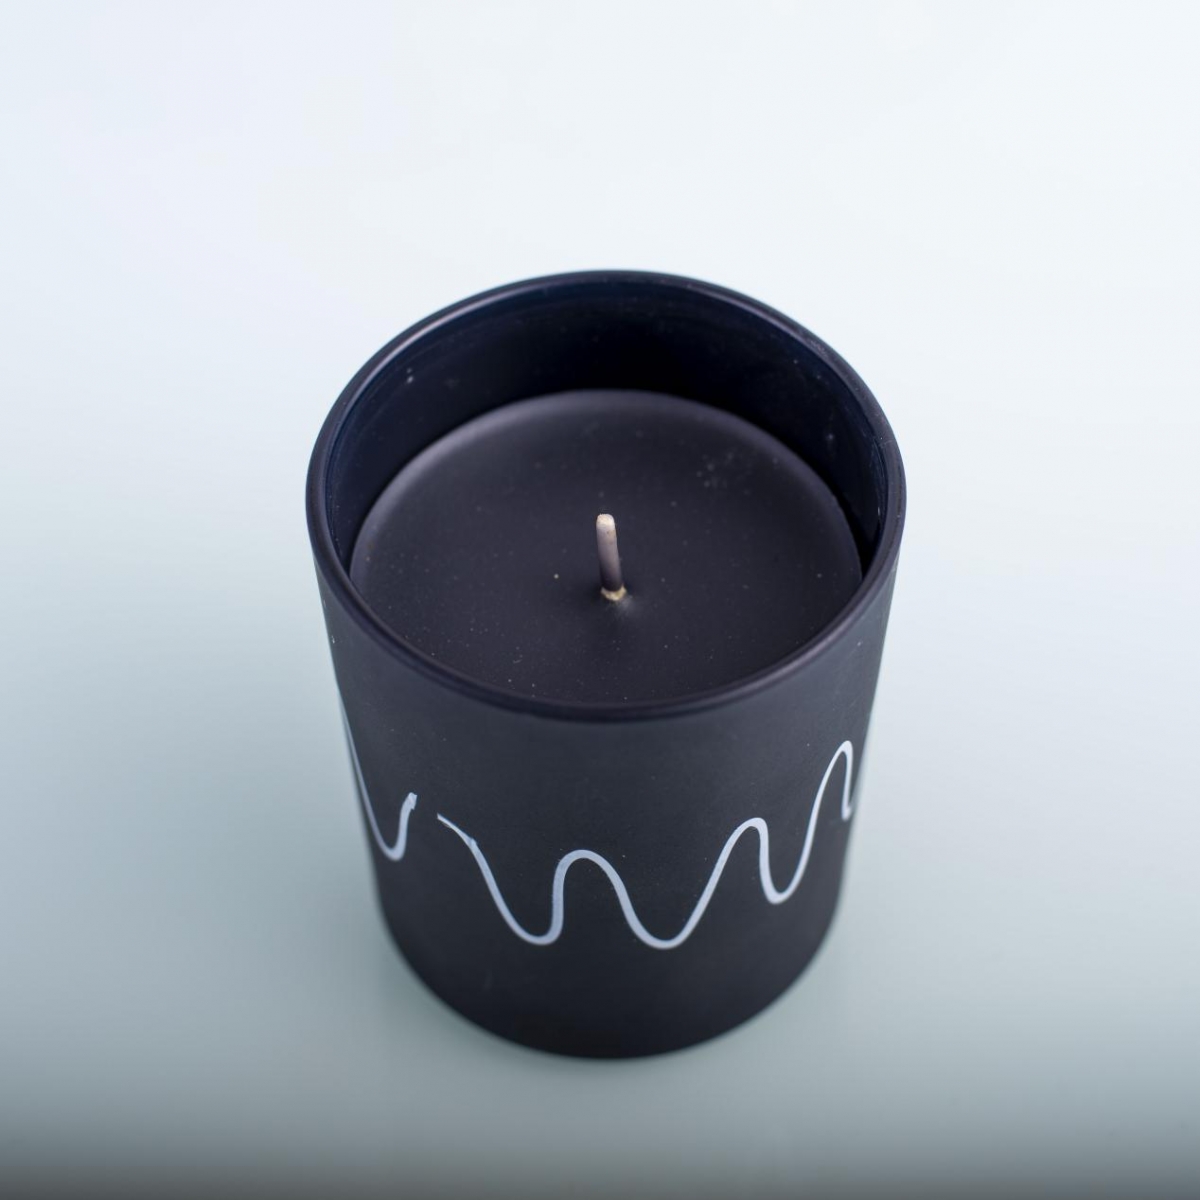 Scented Candles : Amitabha Buddha , Black Candle , Meditation , China Factory , Wholesale Price-HOWCANDLE-Candles,Scented Candles,Aromatherapy Candles,Soy Candles,Vegan Candles,Jar Candles,Pillar Candles,Candle Gift Sets,Essential Oils,Reed Diffuser,Candle Holder,